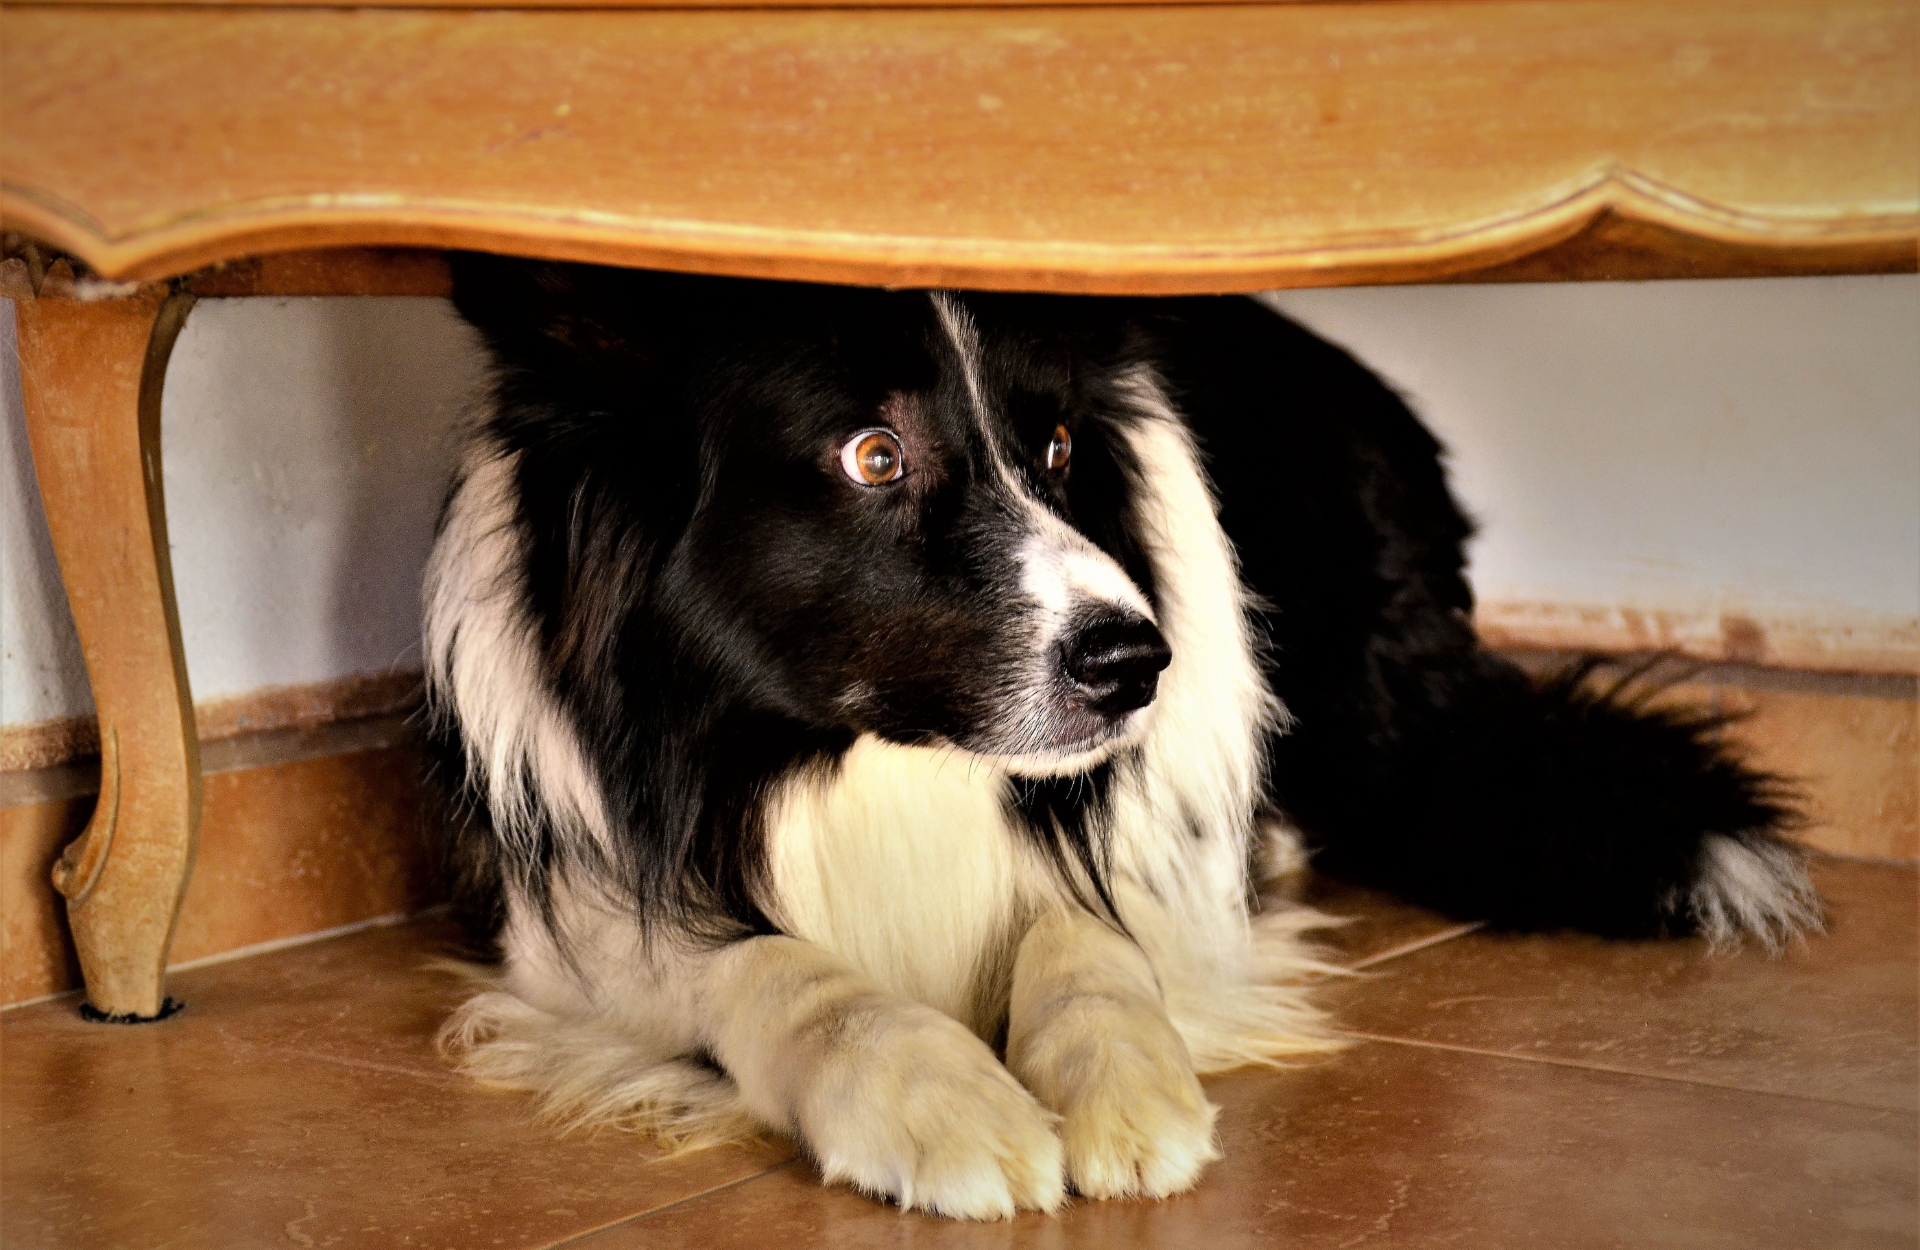 Storms can be scary to our pets, they may pacing, panting, hiding, and becoming anxious.